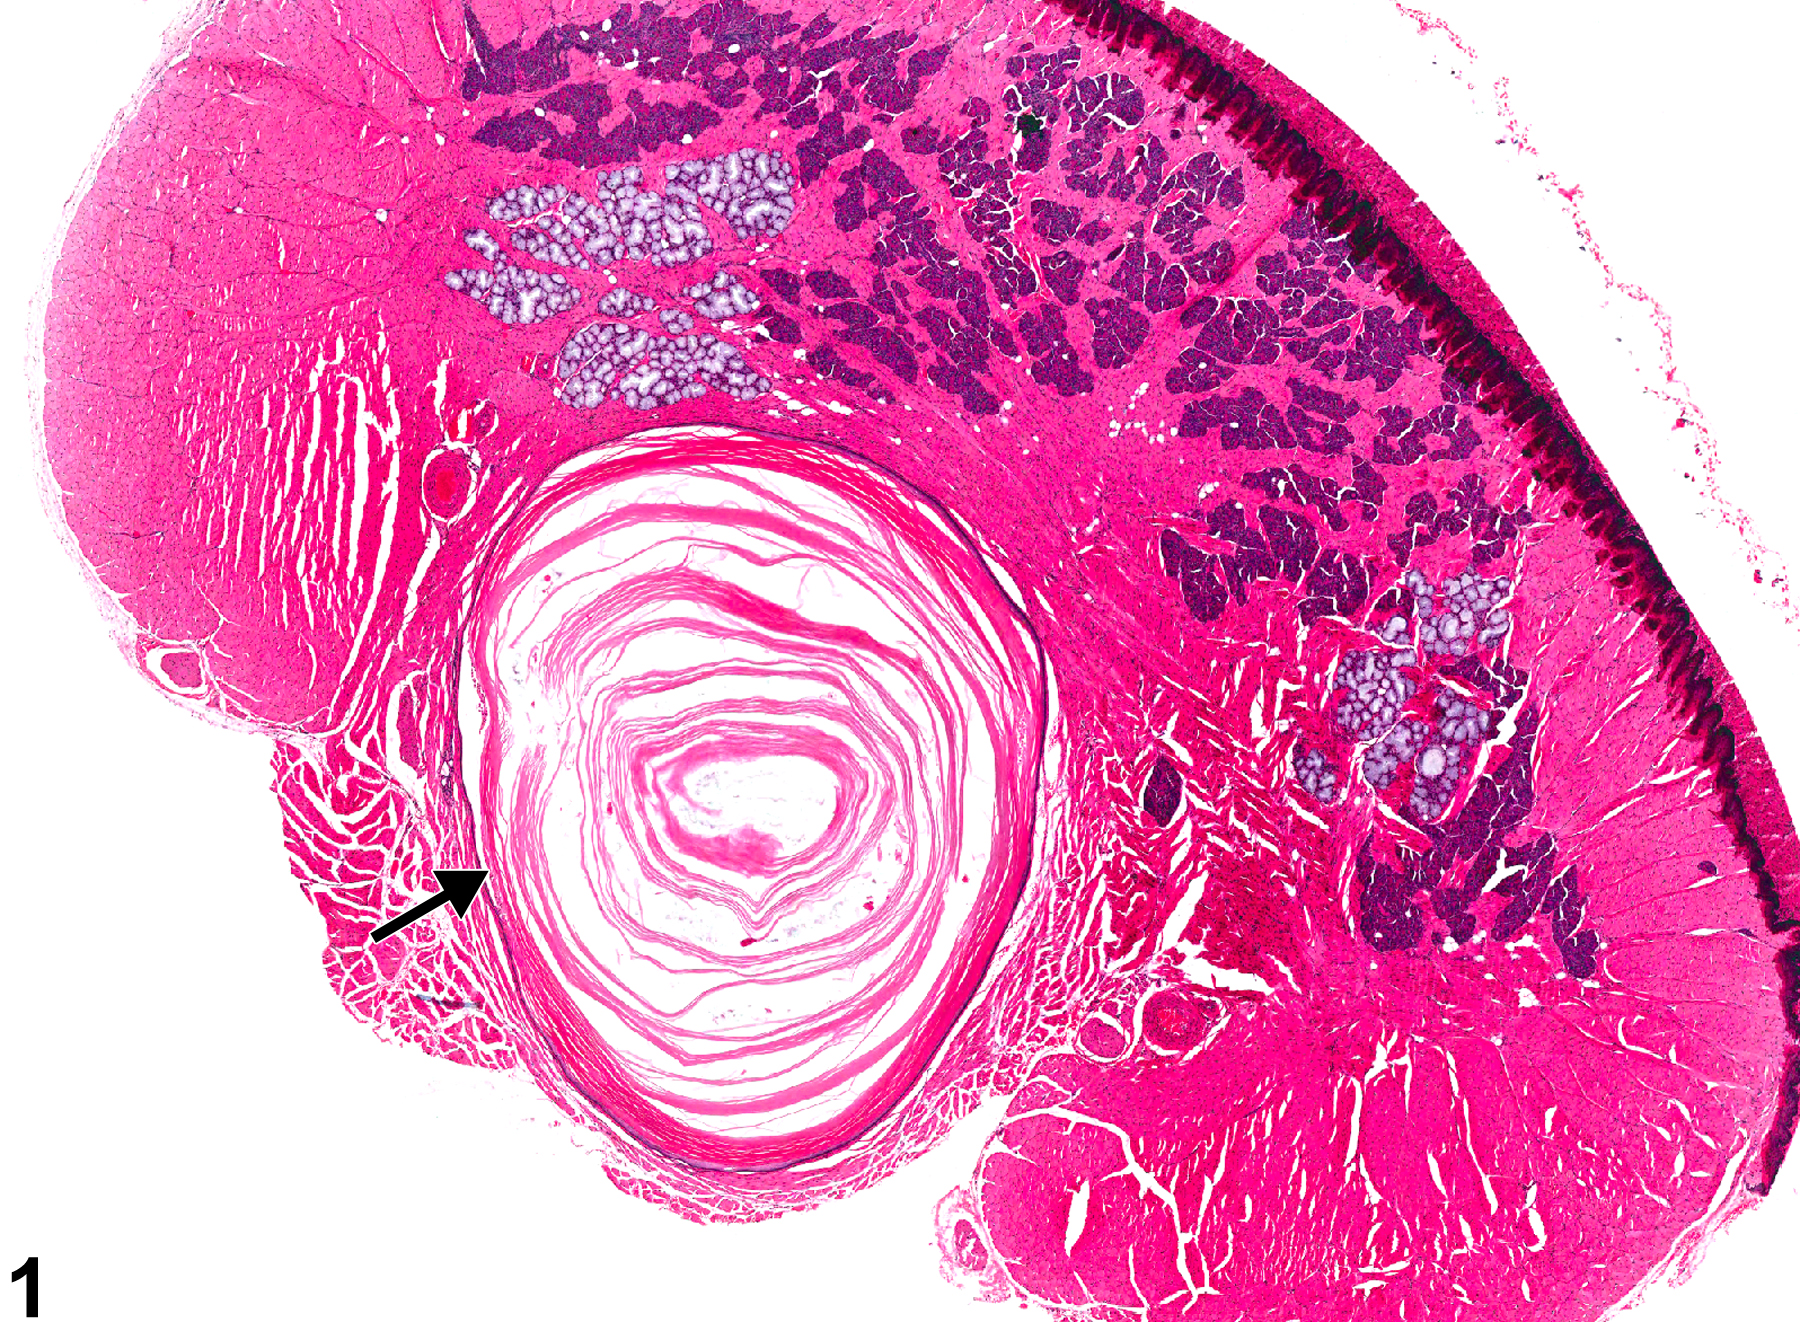 Image of squamous cyst in the tongue from a male F344/N rat in a subchronic study